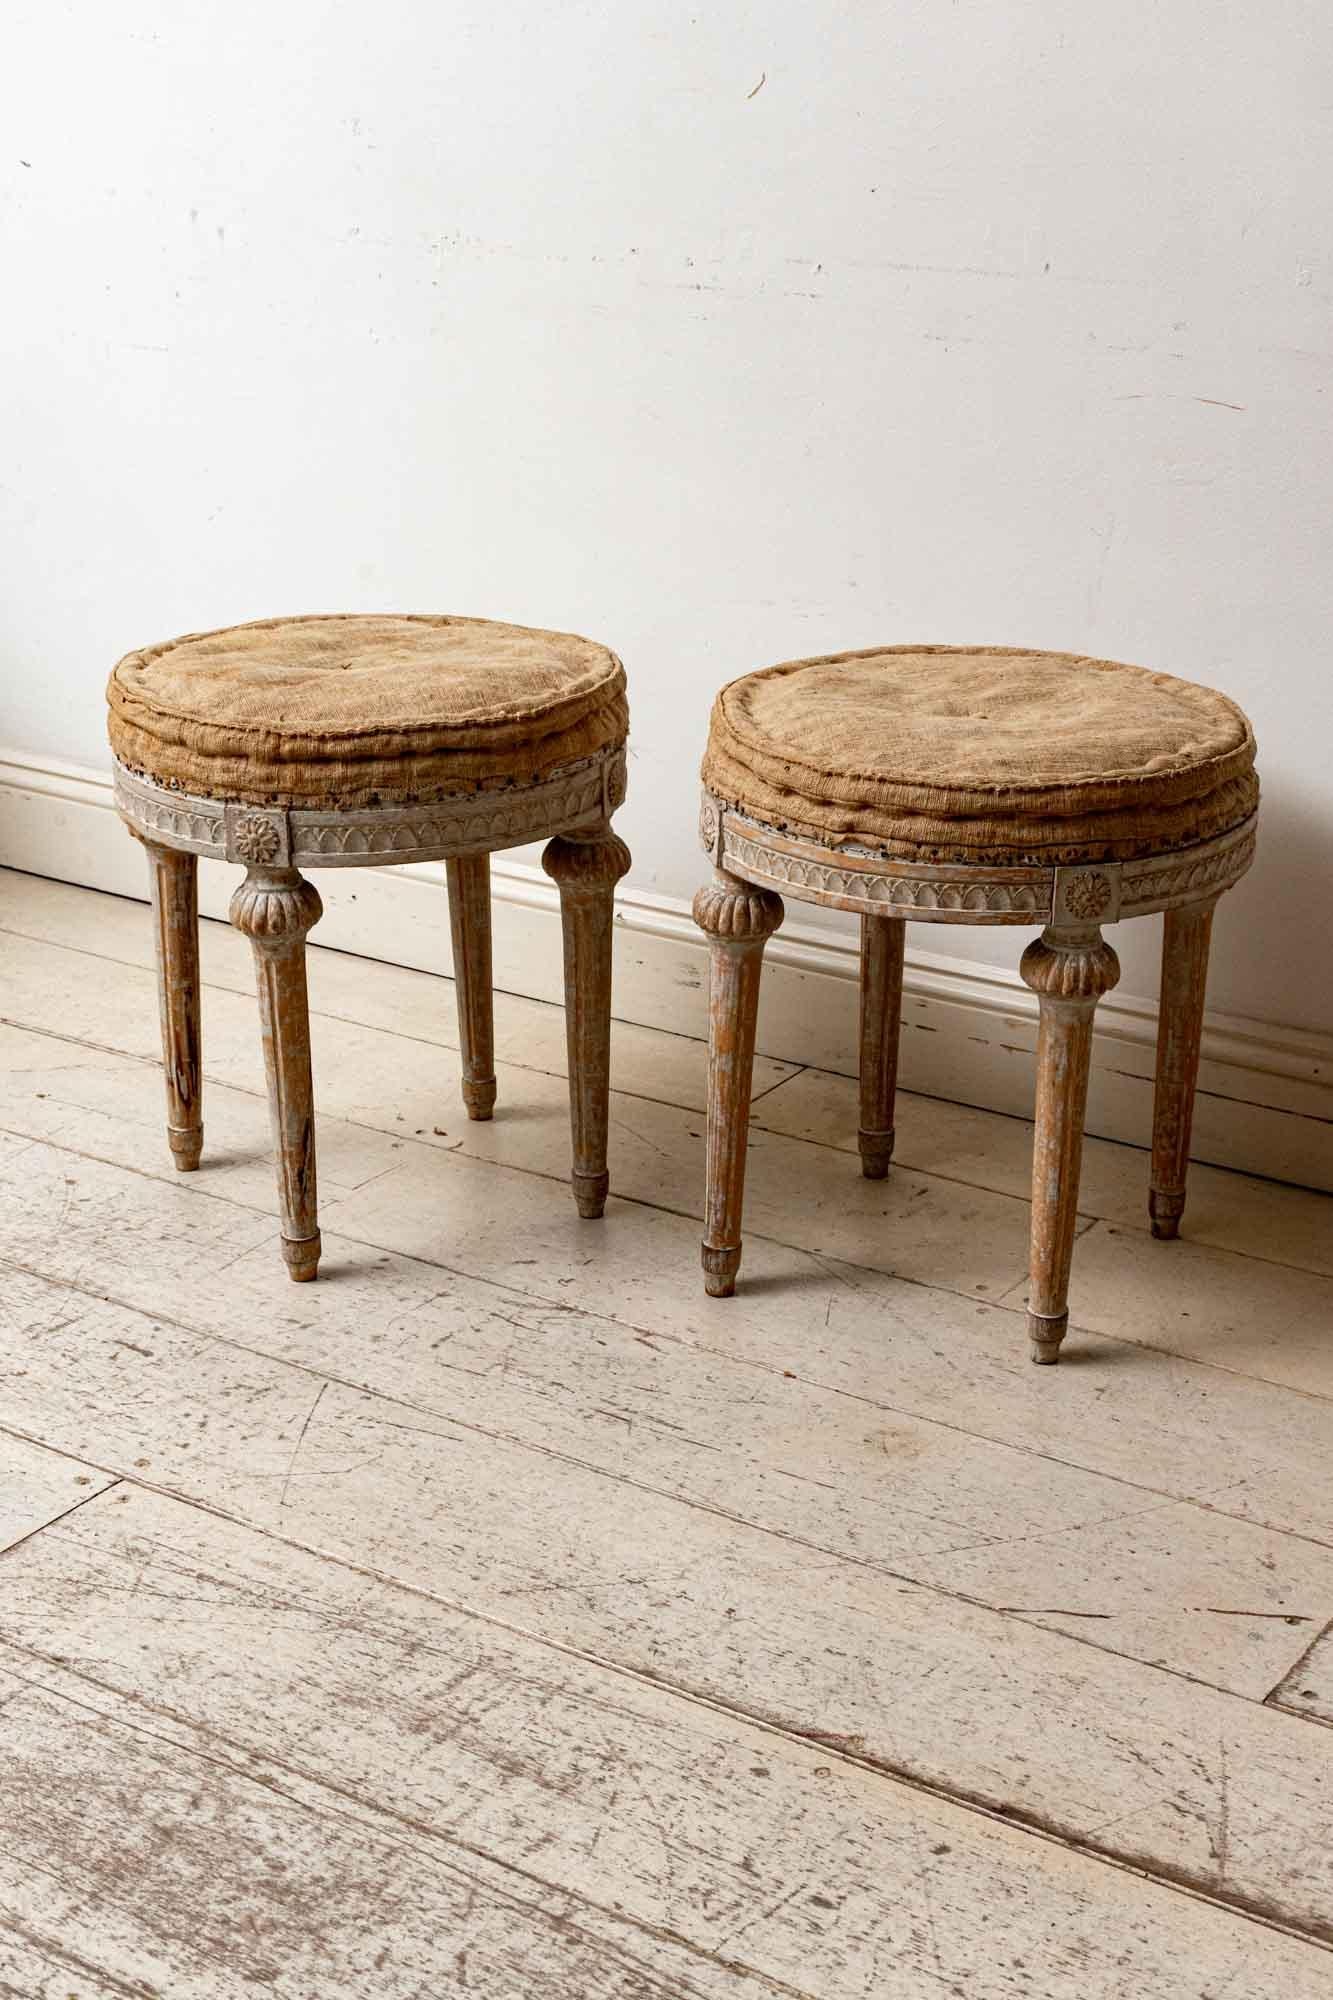 An unusual and exquisite pair of Swedish early 19th century Gustavian period round stools. Set on four grooved tapered legs, the stools feature beautiful detailing to the top of the legs, where they meet the seat, and around the seat base itself.